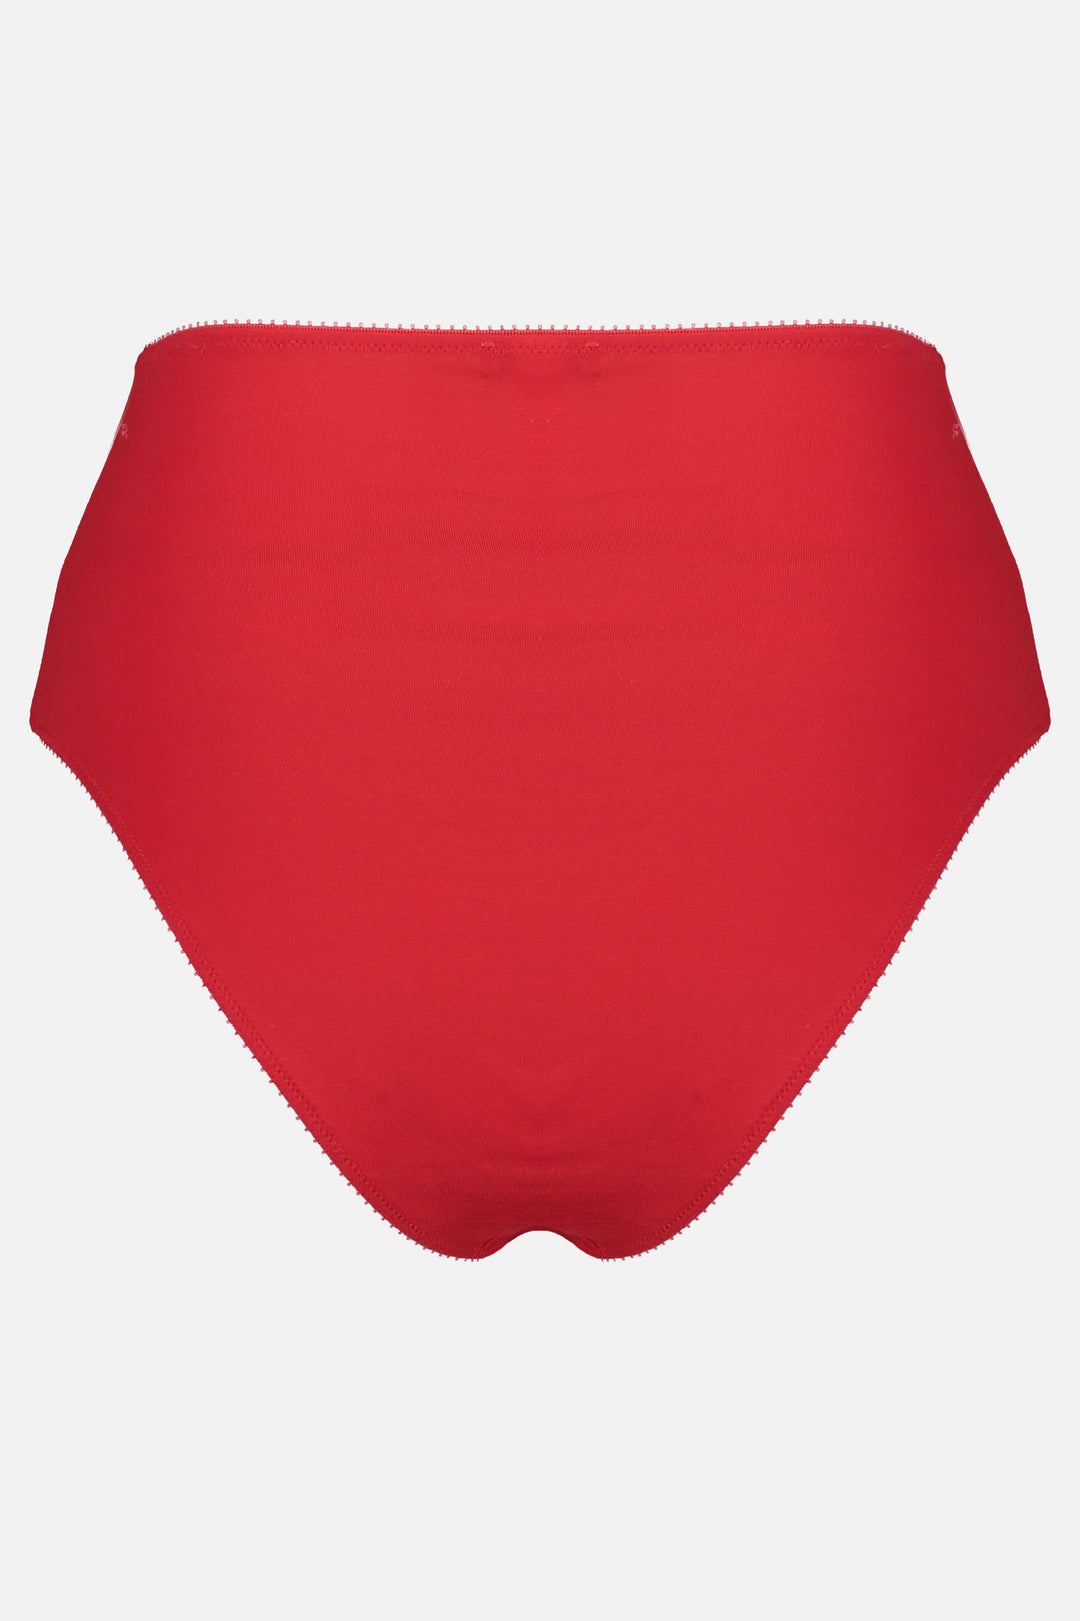 Videris Lingerie high waist knicker in red TENCEL™ with a flattering legline and soft elastics